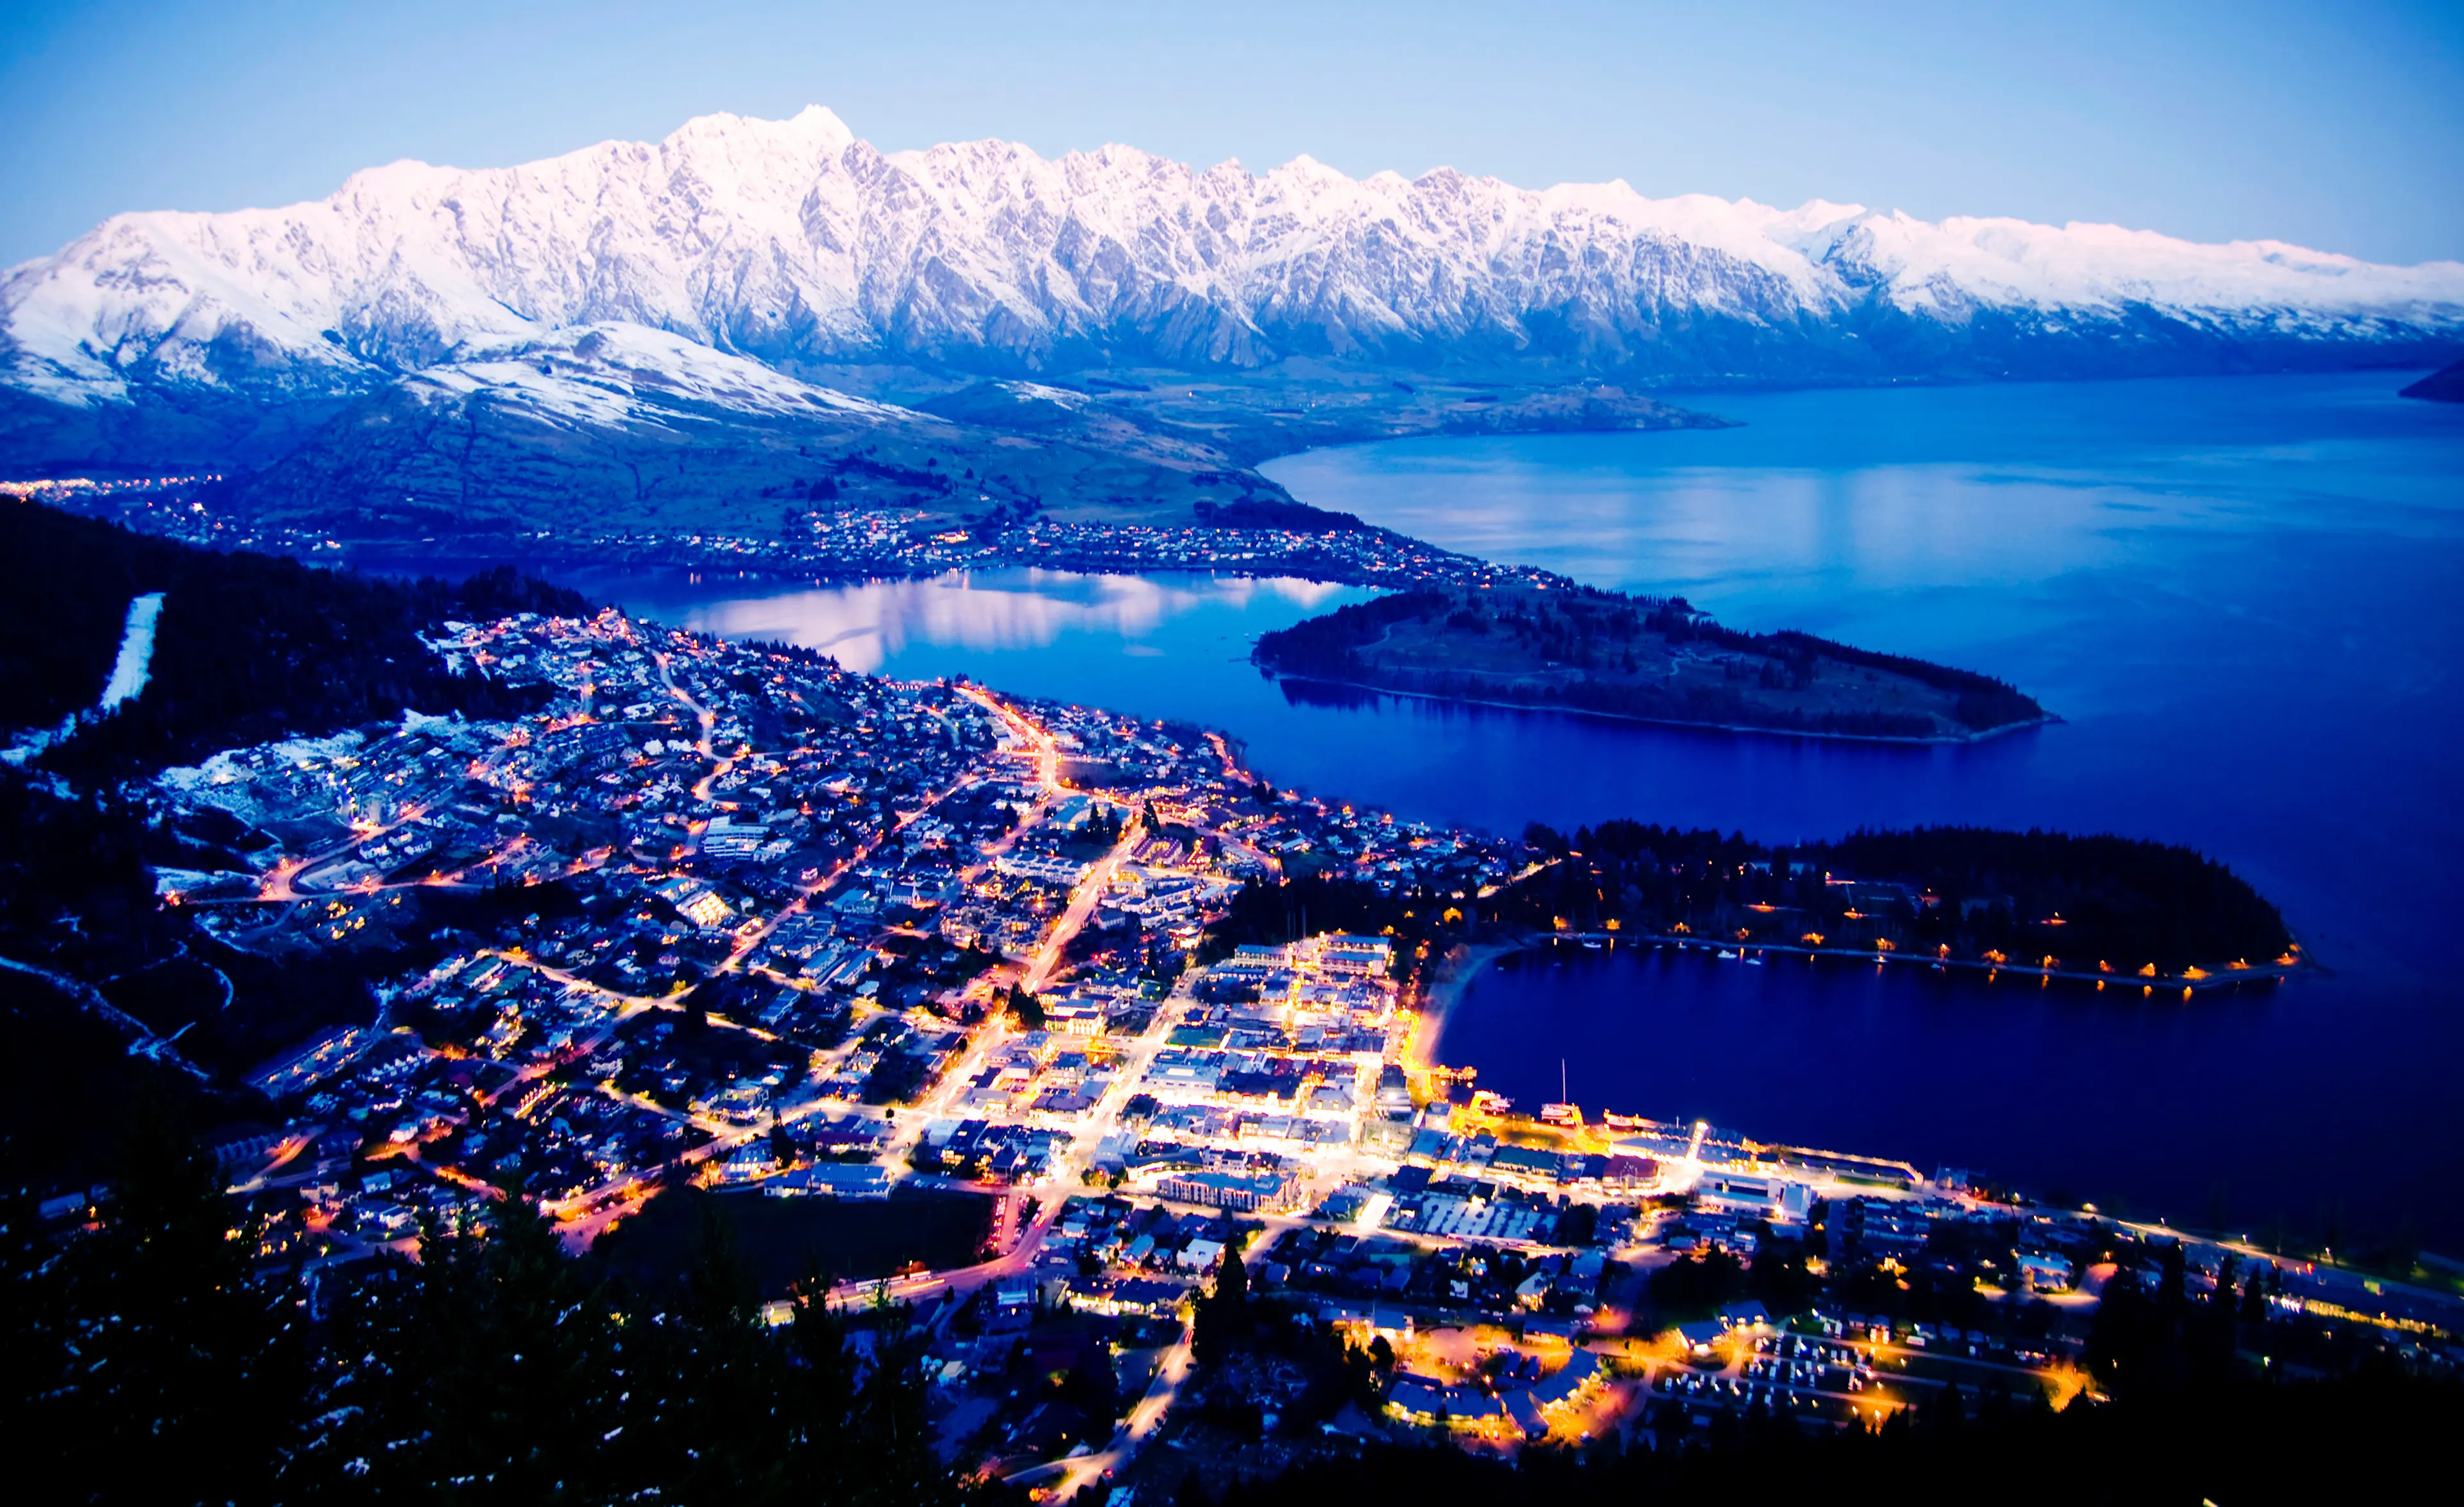 2-Day Spectacular Queenstown, New Zealand Adventure Itinerary